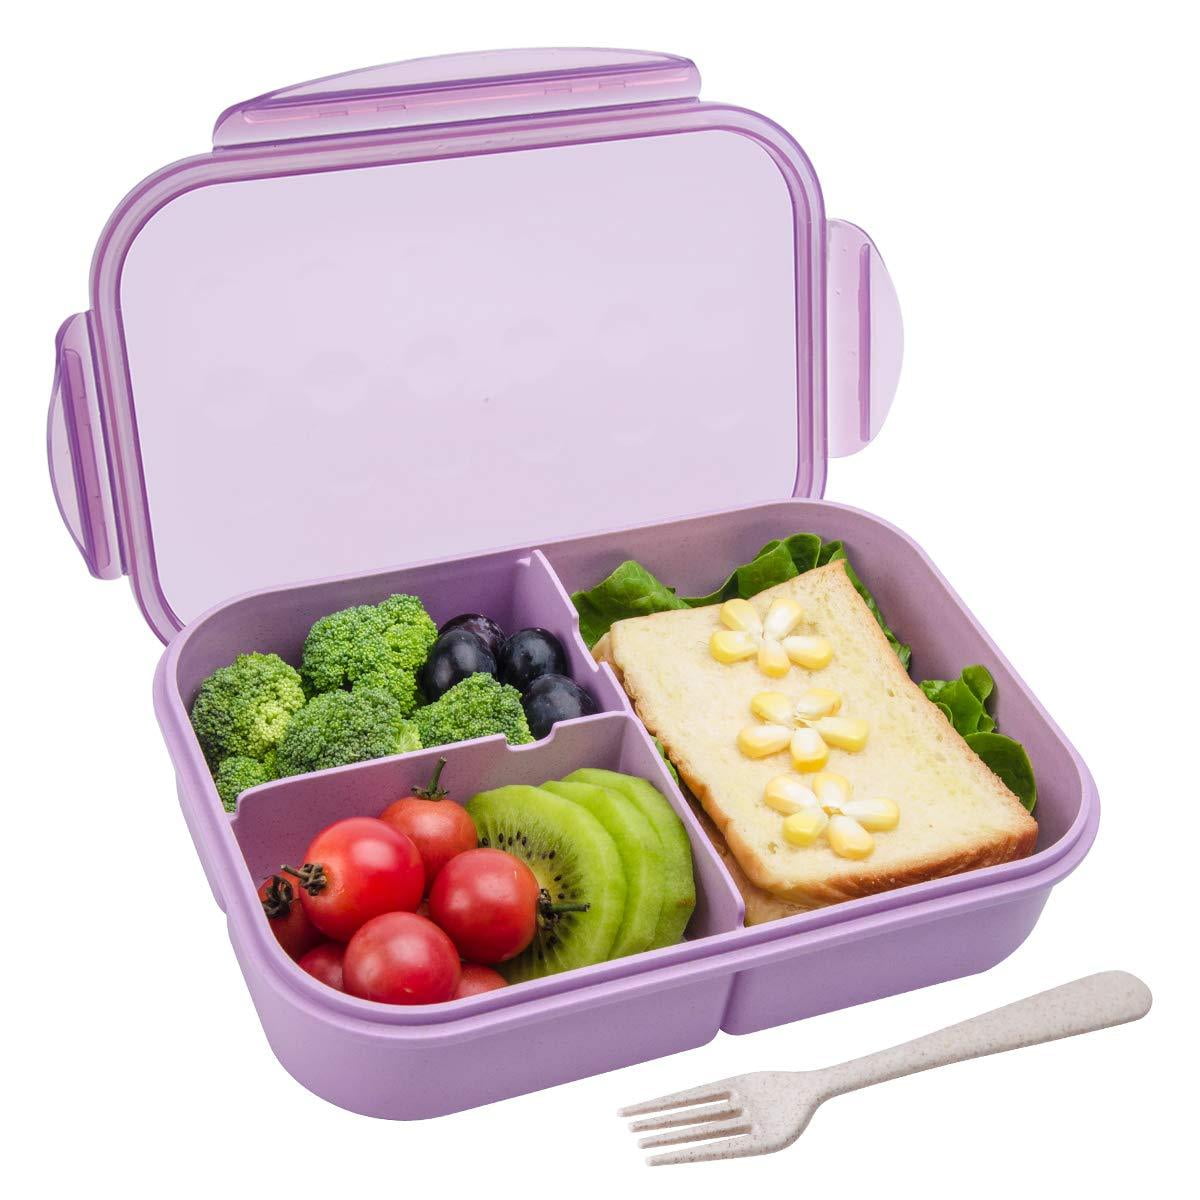 Evjurcn Bento Adults Kids Lunch Box, Iteryn Stackable Bento Box, 3-in-1 Compartment - Wheat Straw, Leakproof Eco-Friendly Bento Lunch Box Meal Prep